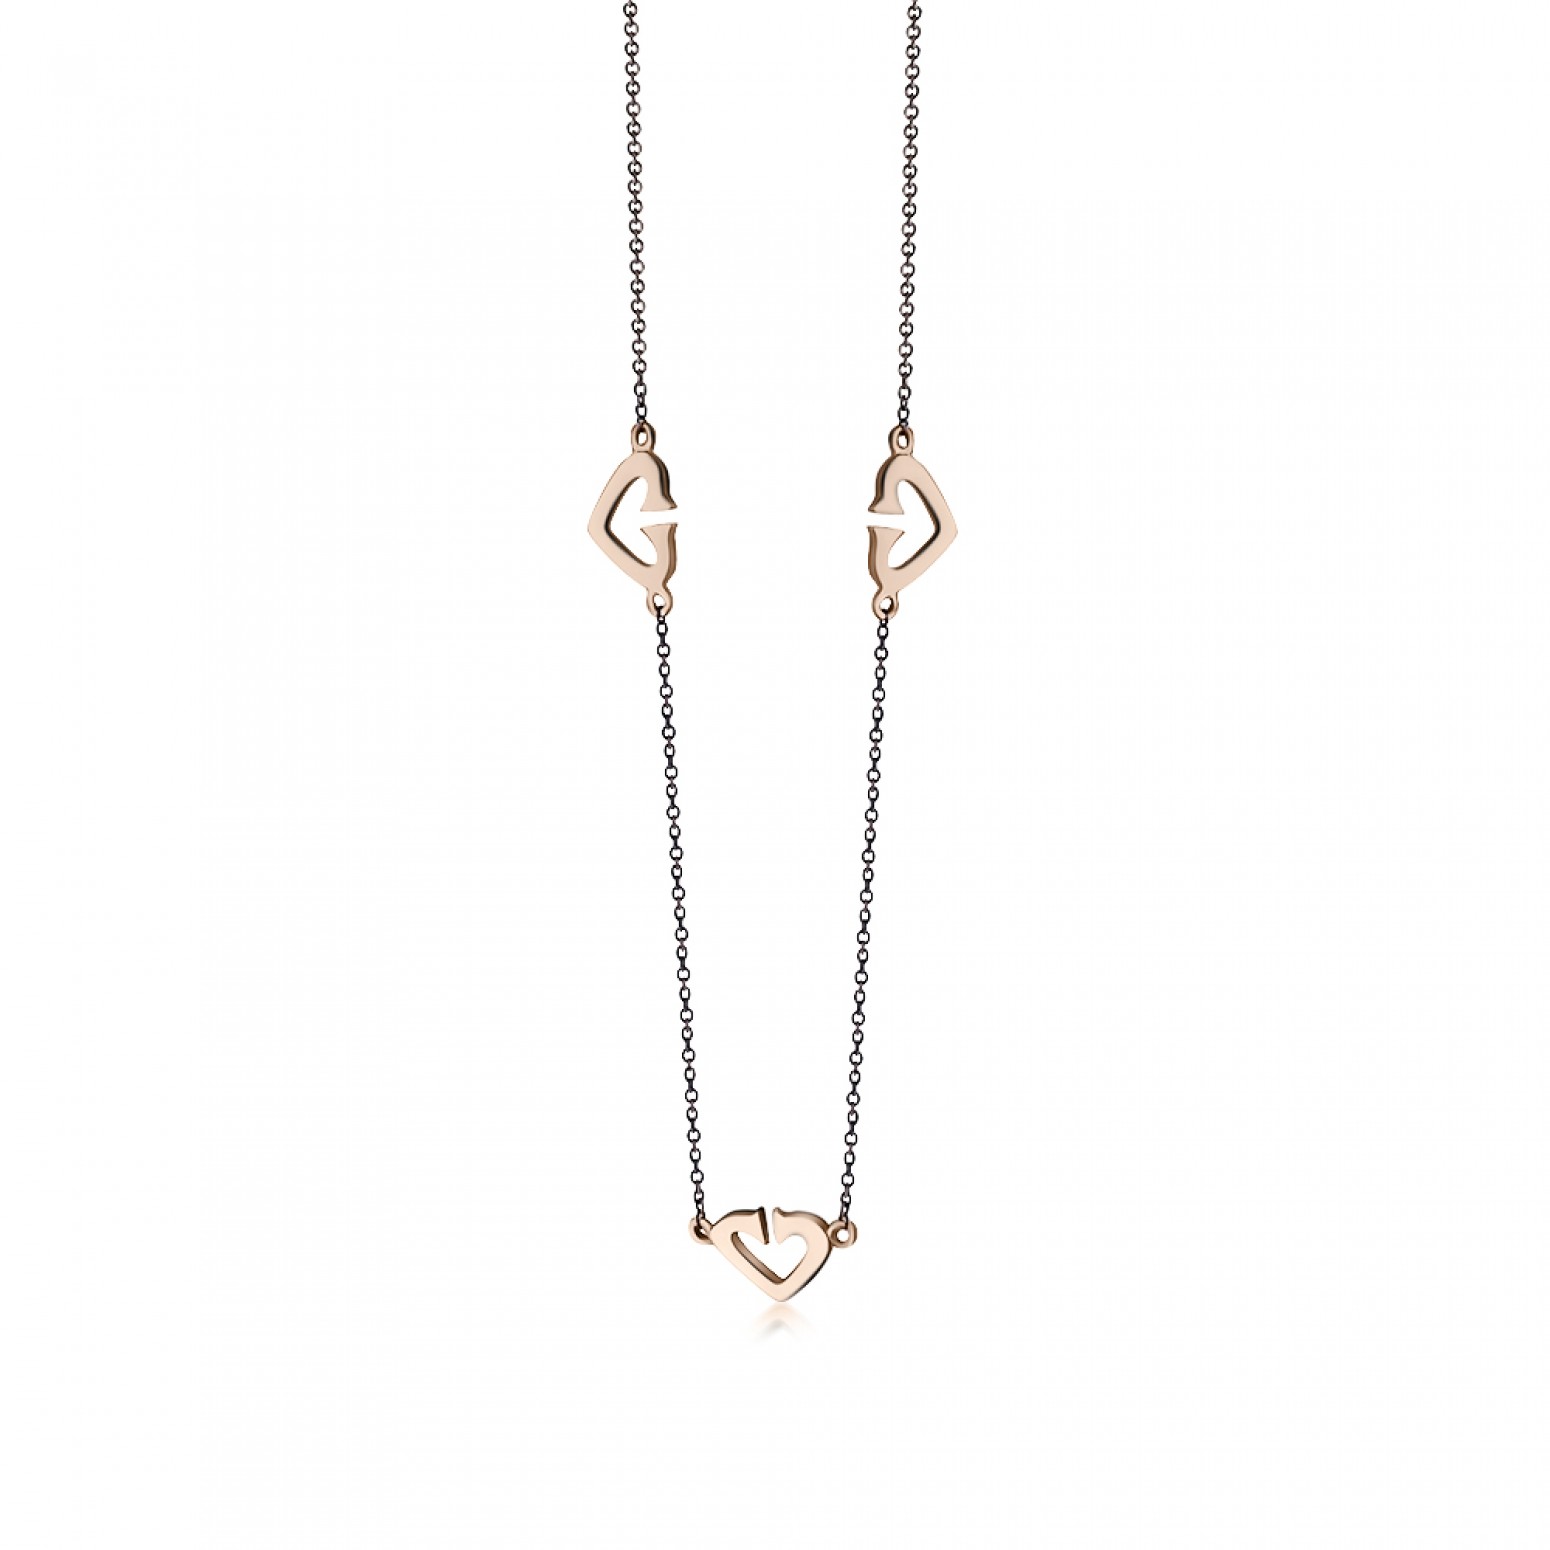 Heart necklace, Κ9 pink gold and black rhodium plated, ko3716 NECKLACES Κοσμηματα - chrilia.gr